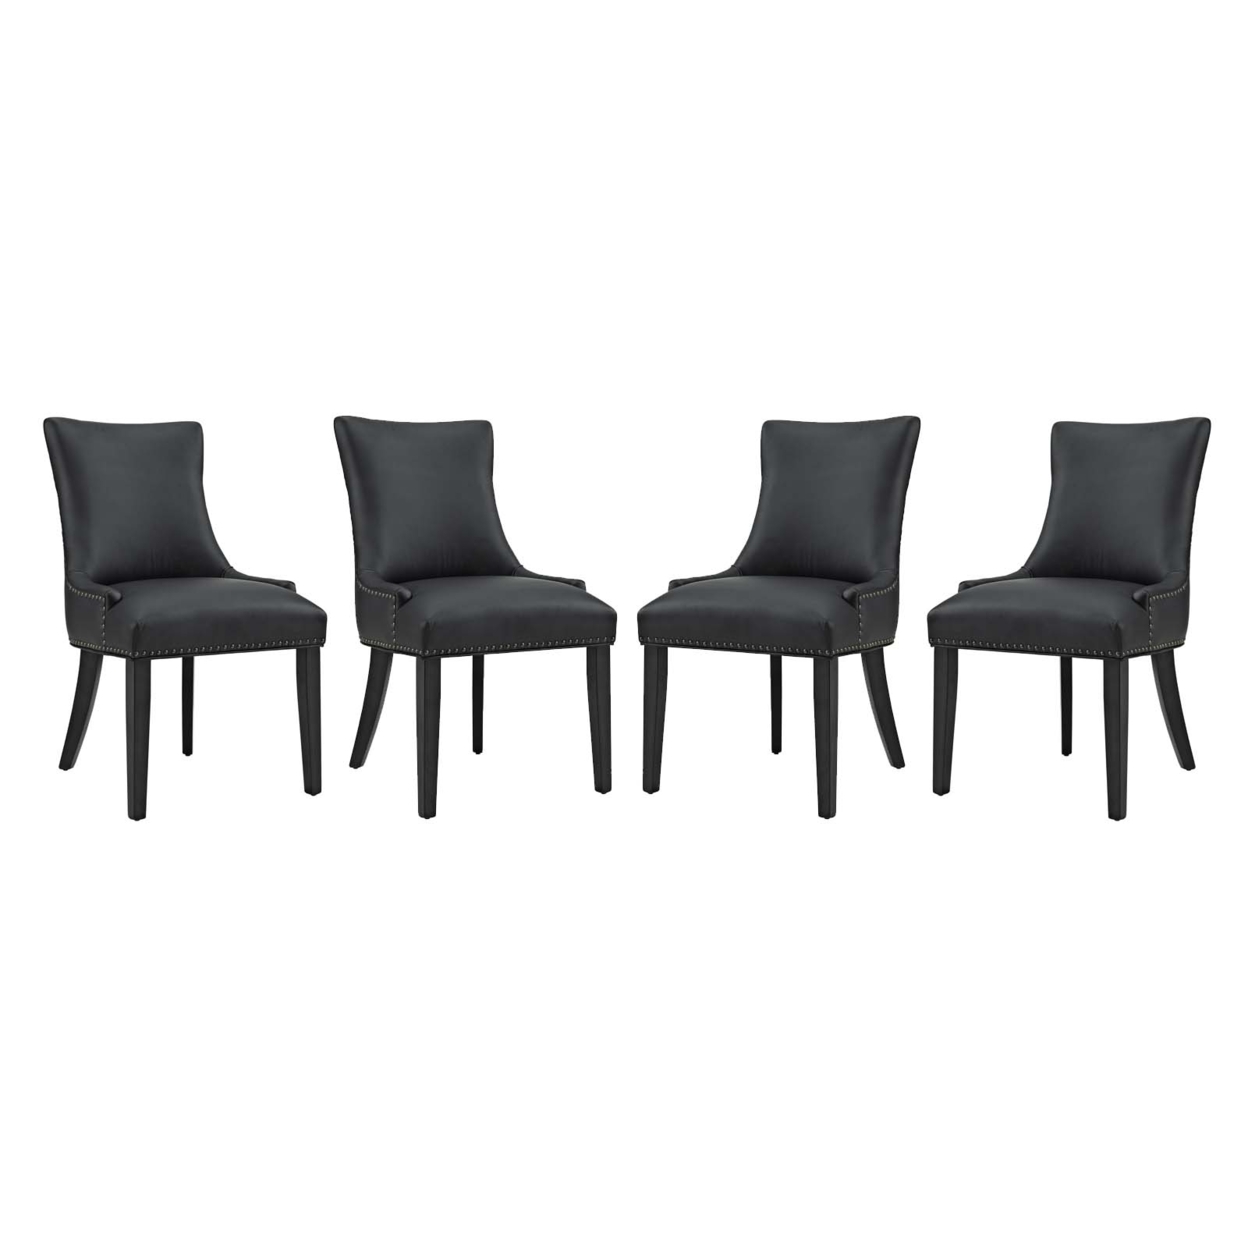 Marquis Dining Chair Faux Leather Set Of 4, Black